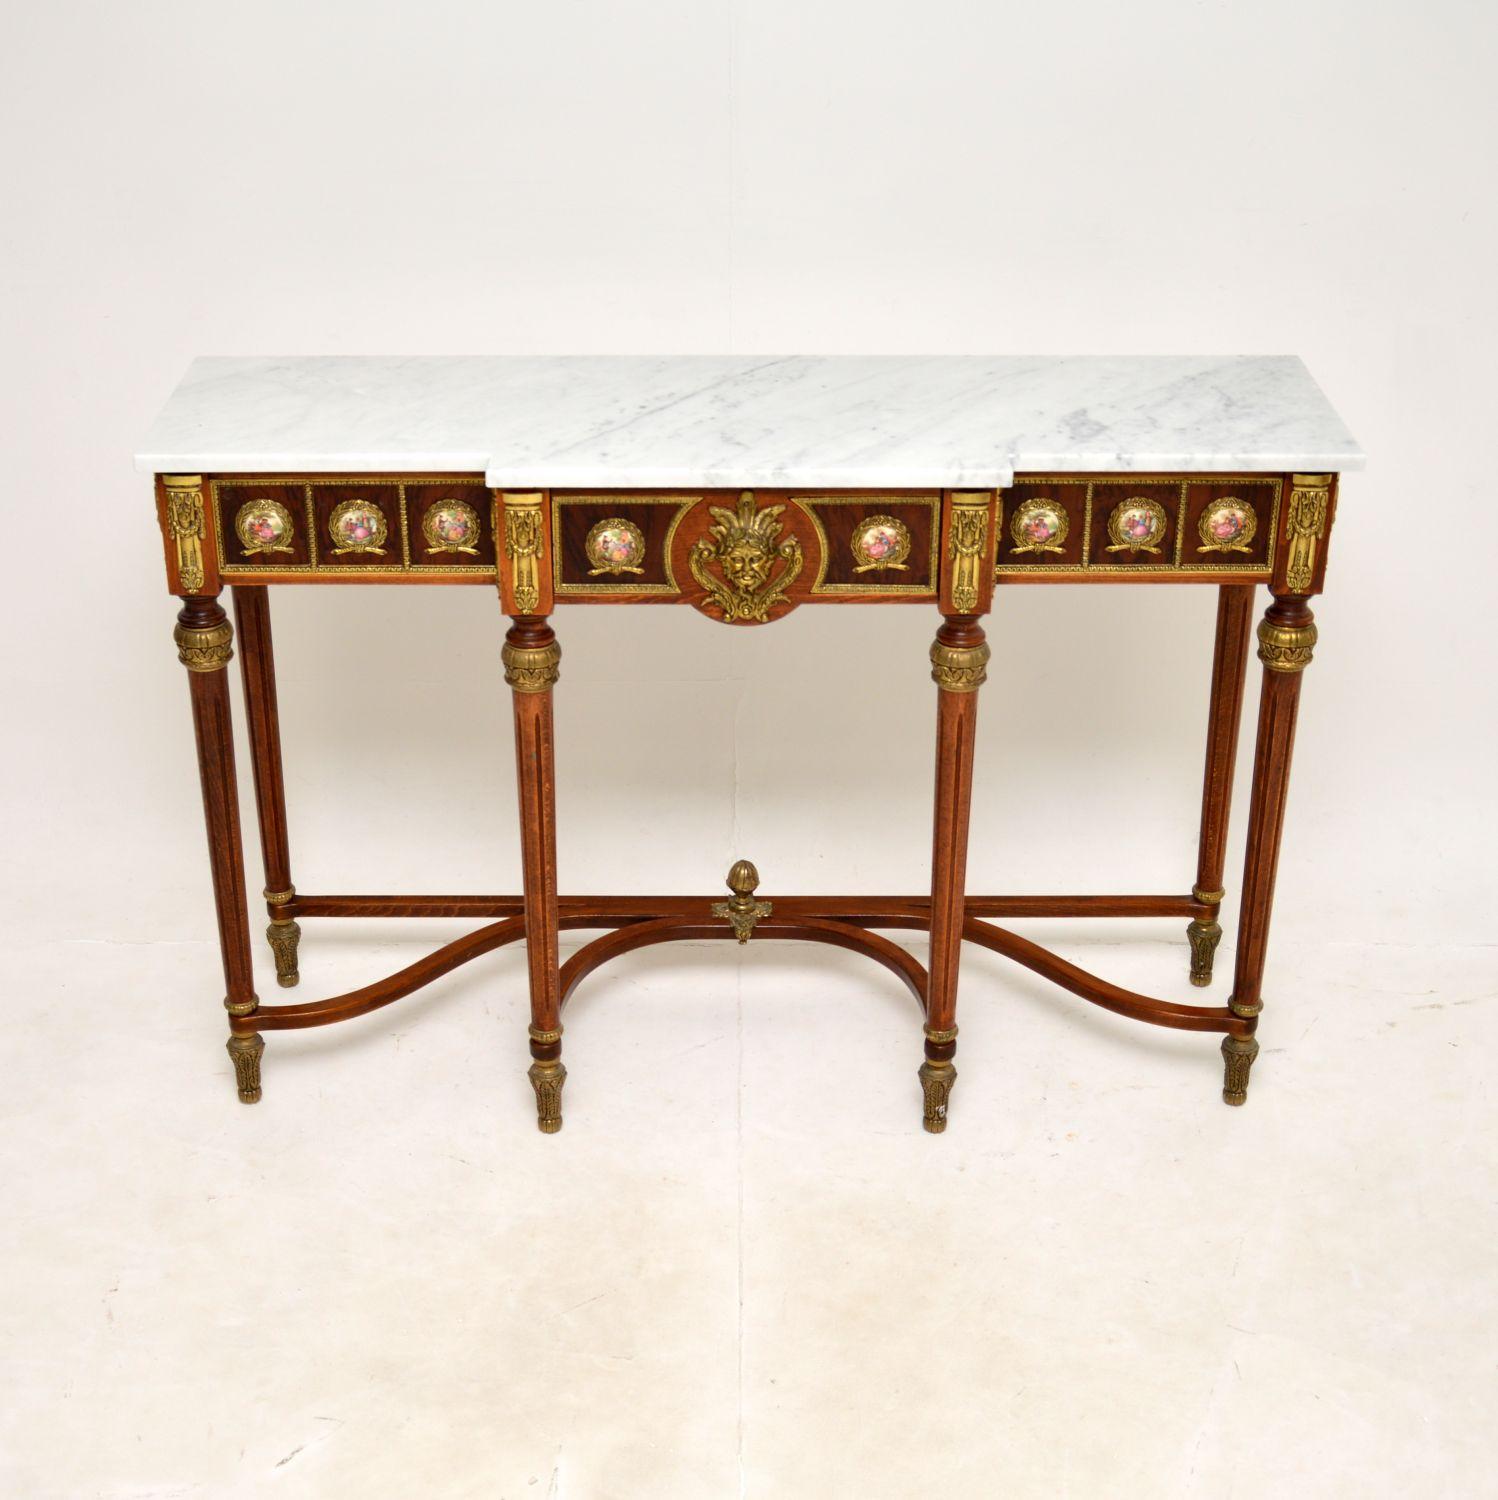 An absolutely stunning and very impressive antique French marble top console table, dating from around the 1930’s.

This is of superb quality, it is a great size and has lots of beautiful features. It is made primarily of birch, adorned with high